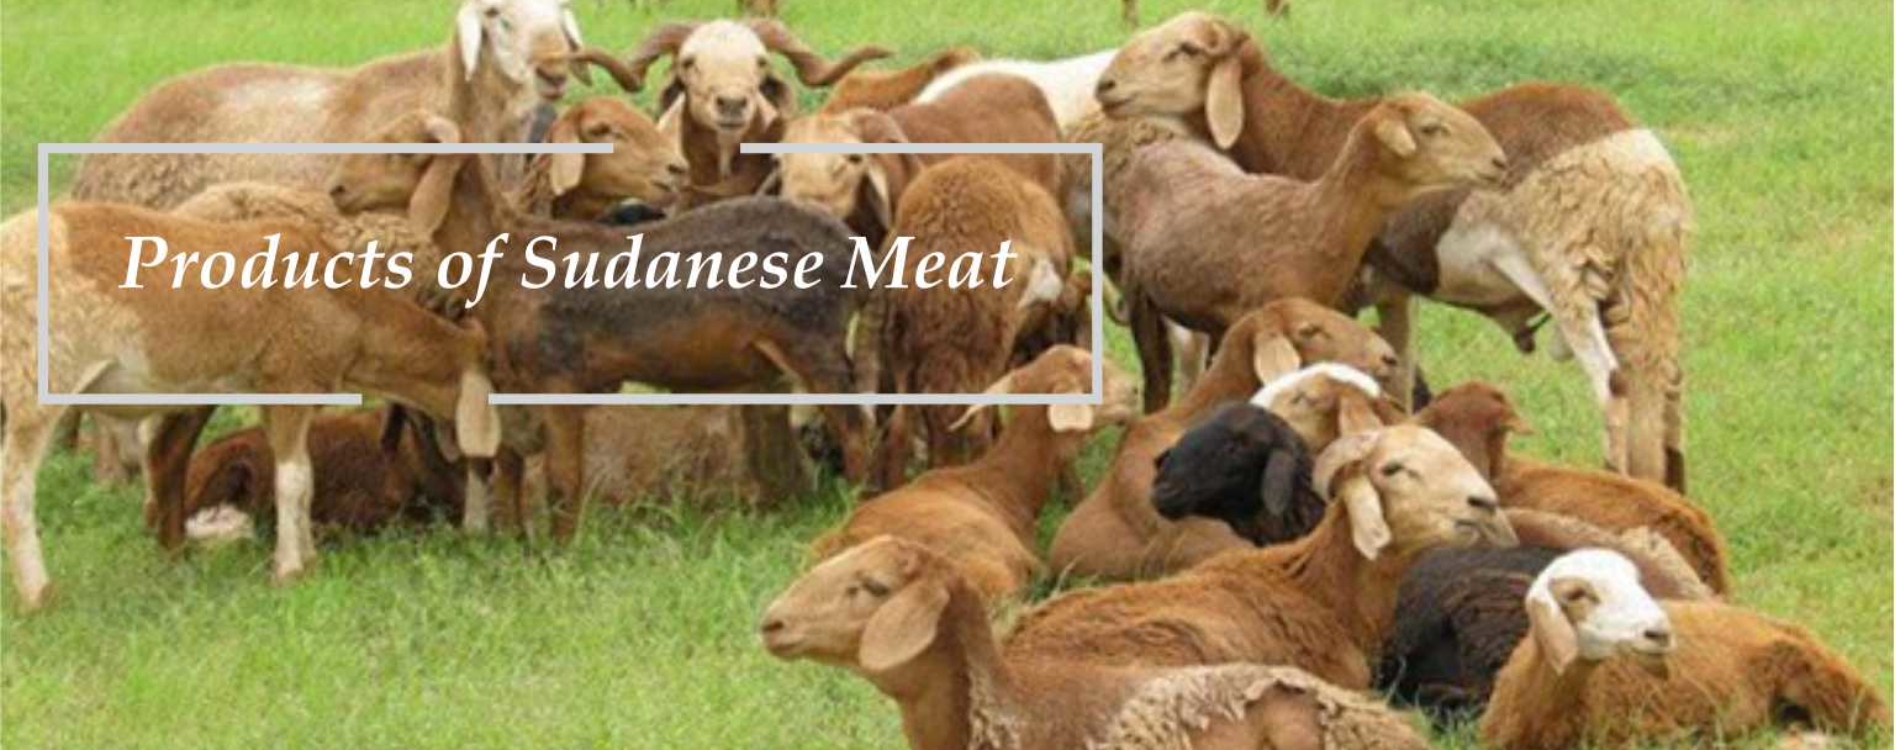 Products of sud meat